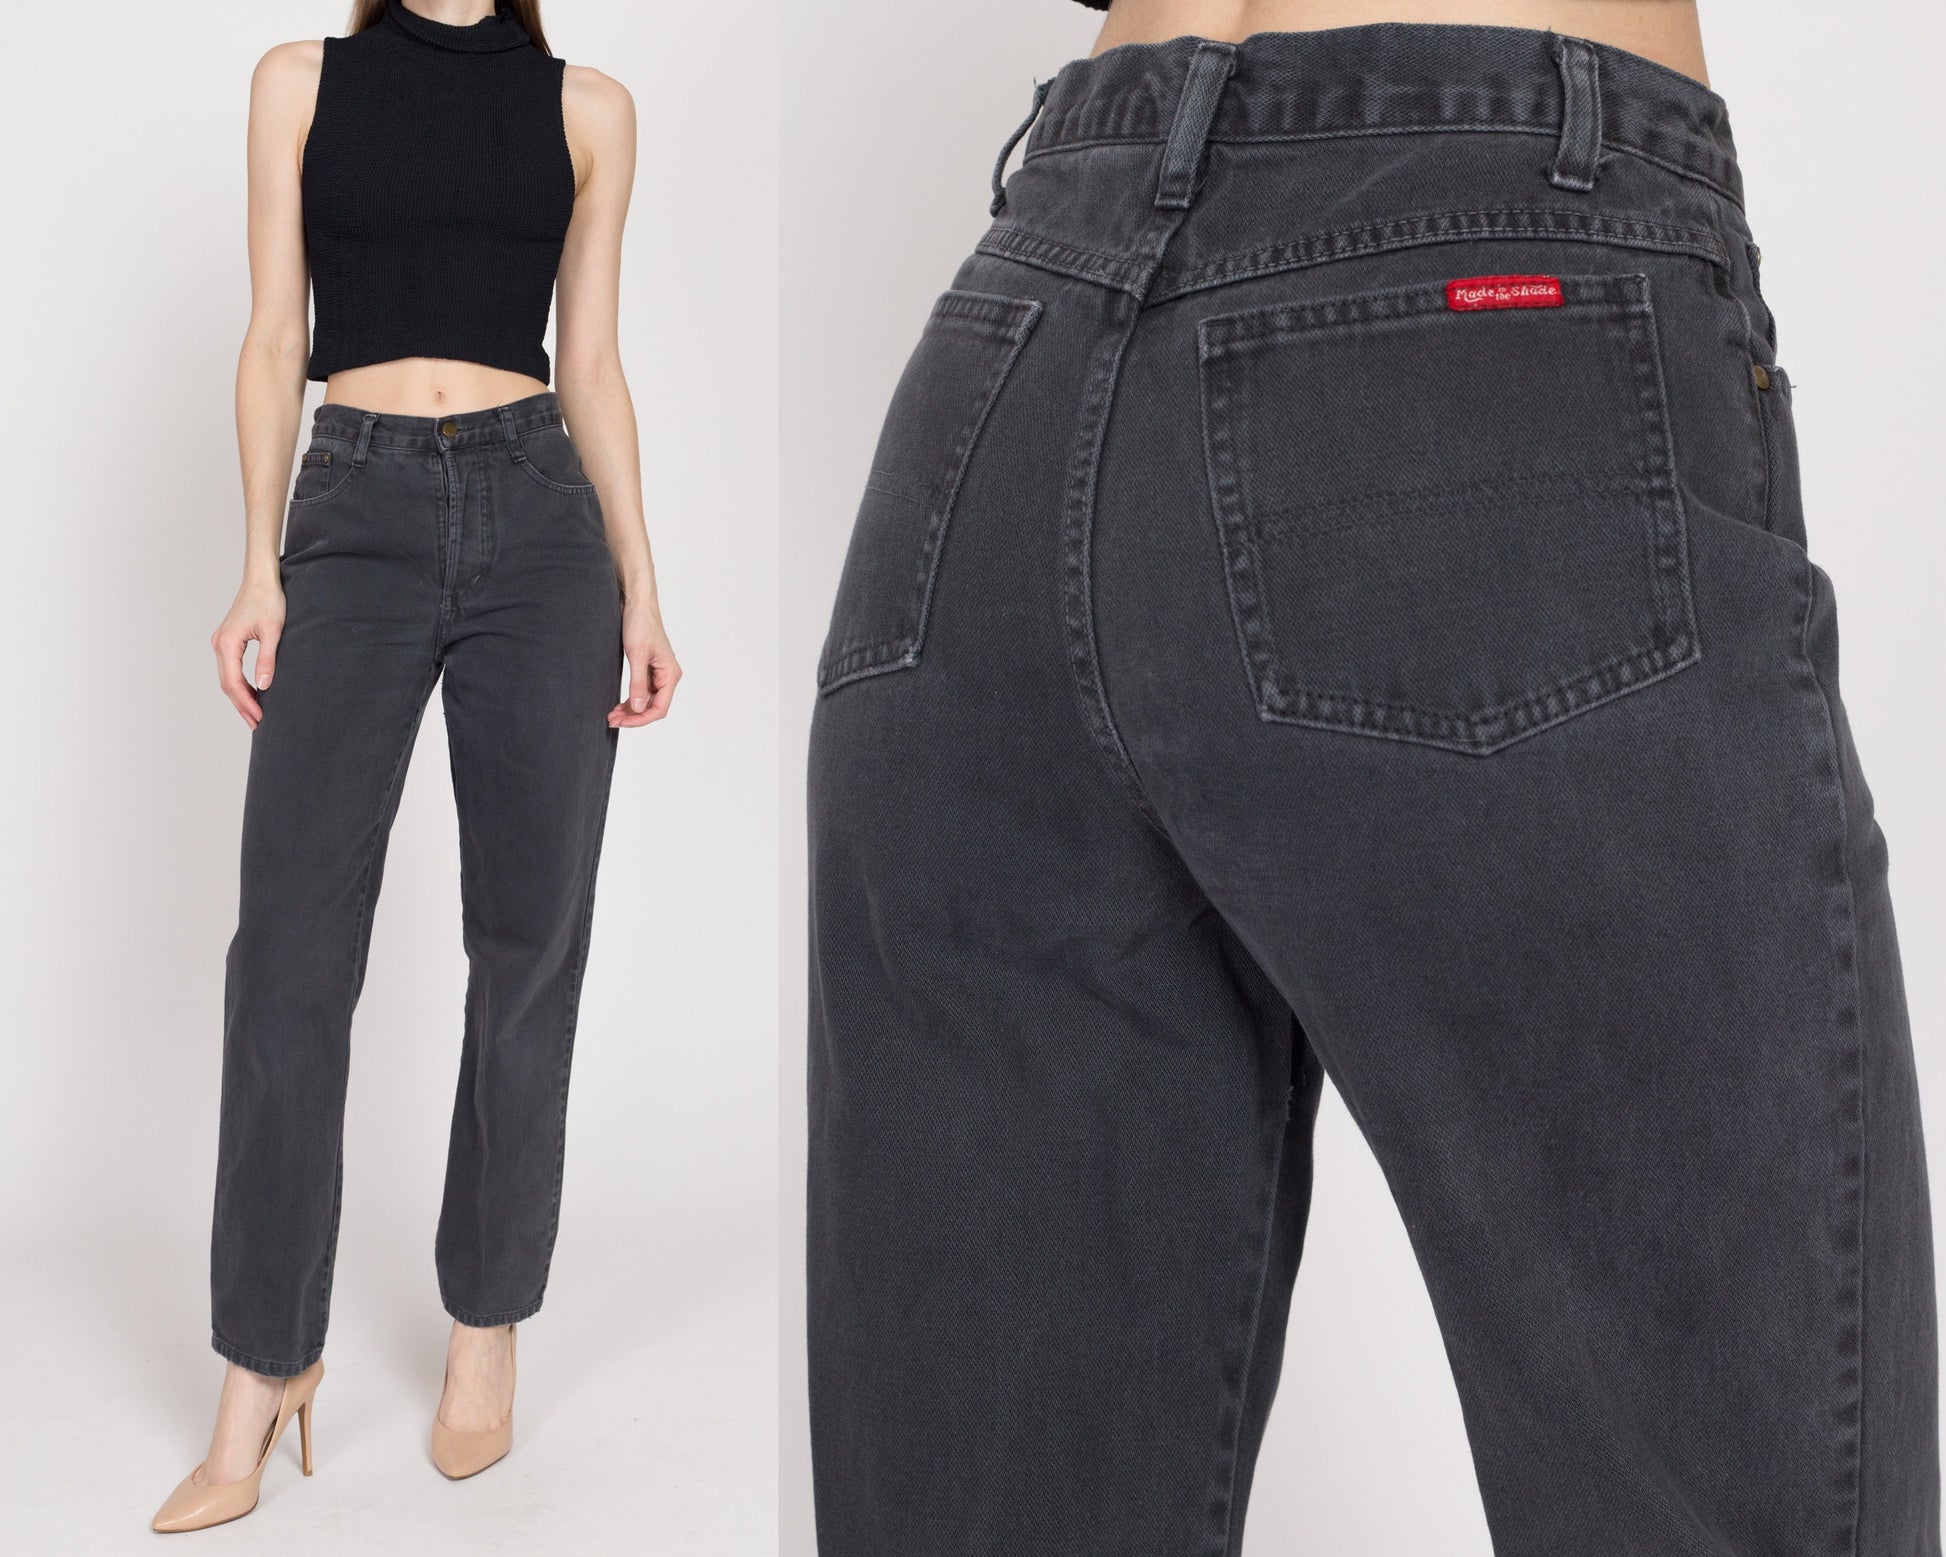 Small 90s Faded Black High Waisted Jeans 27" | Vintage Denim Mom Jeans